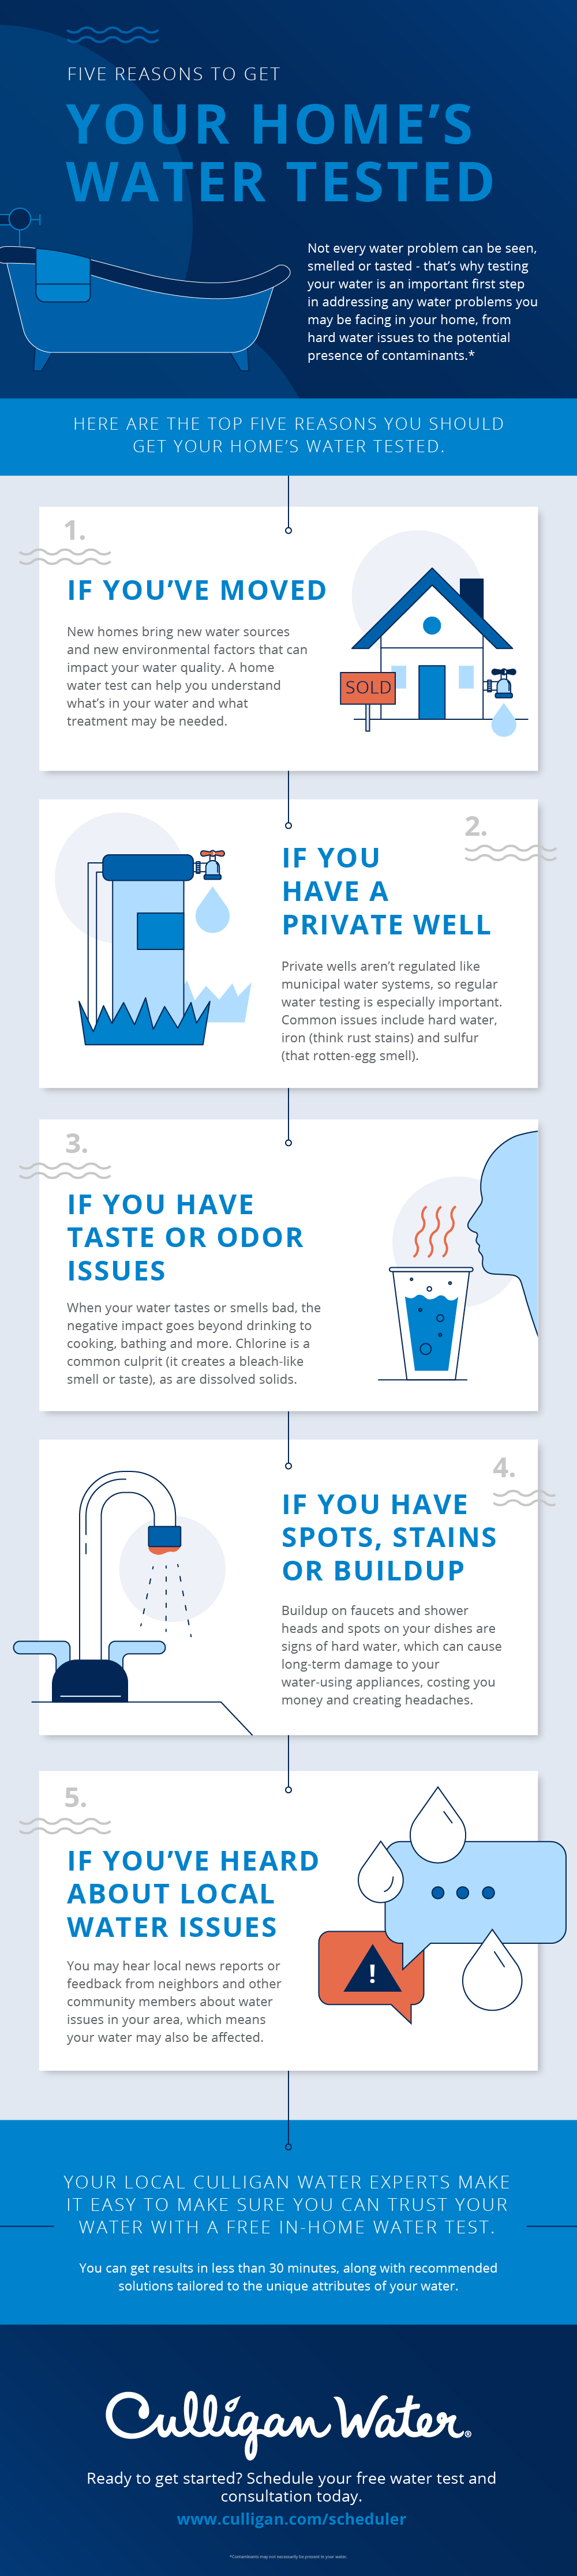 an explanation of the reasons to get your home's water tested